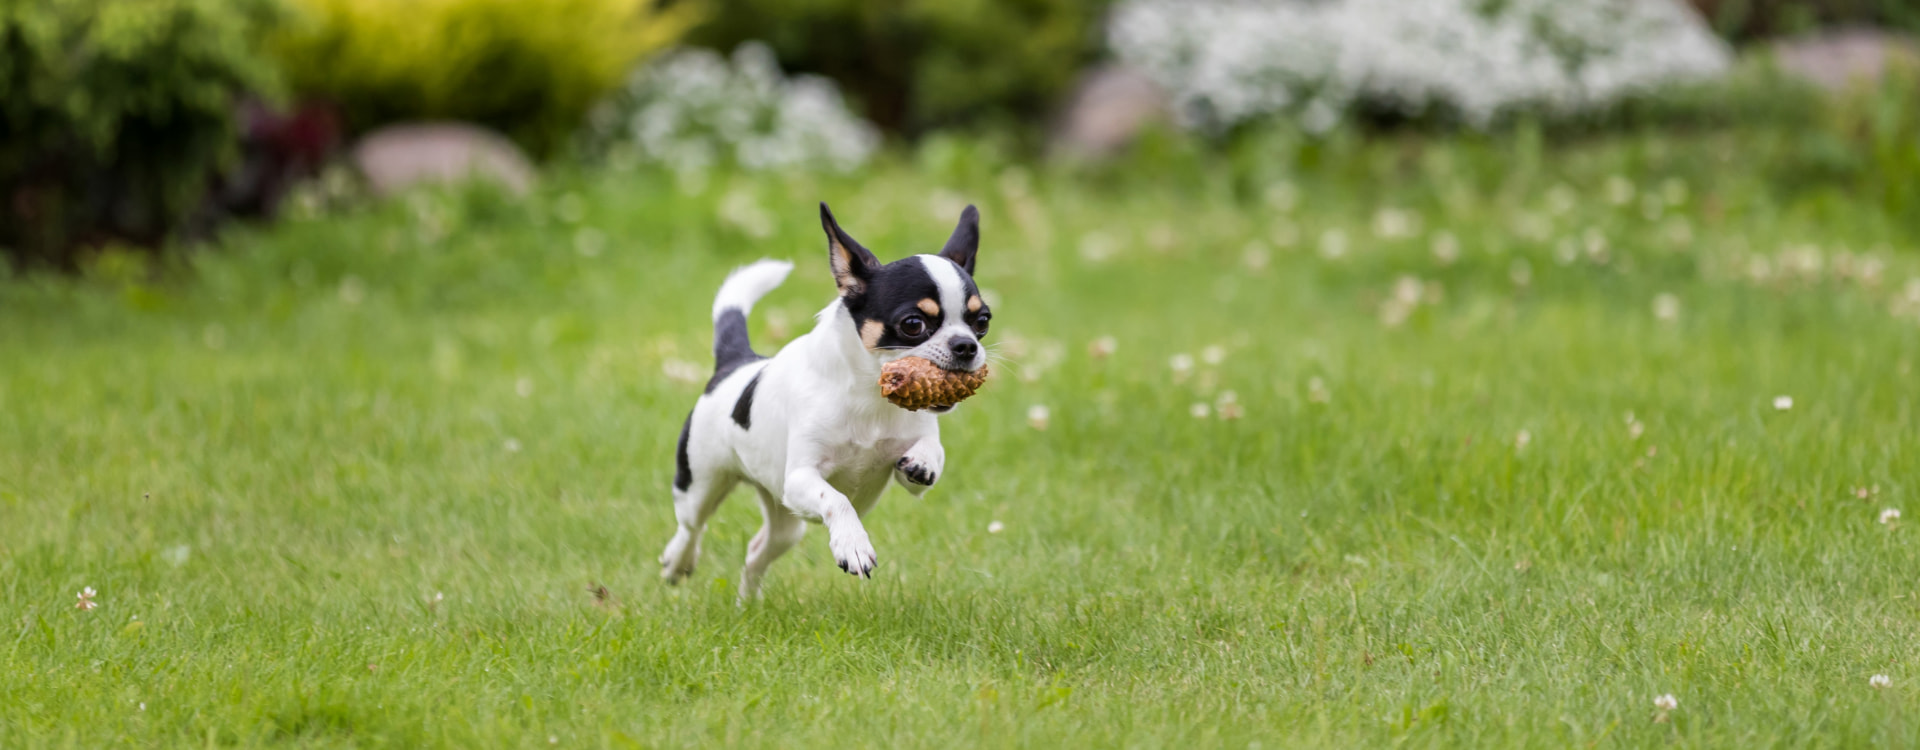 Dog running through a green meadow with a pineapple in its mouth